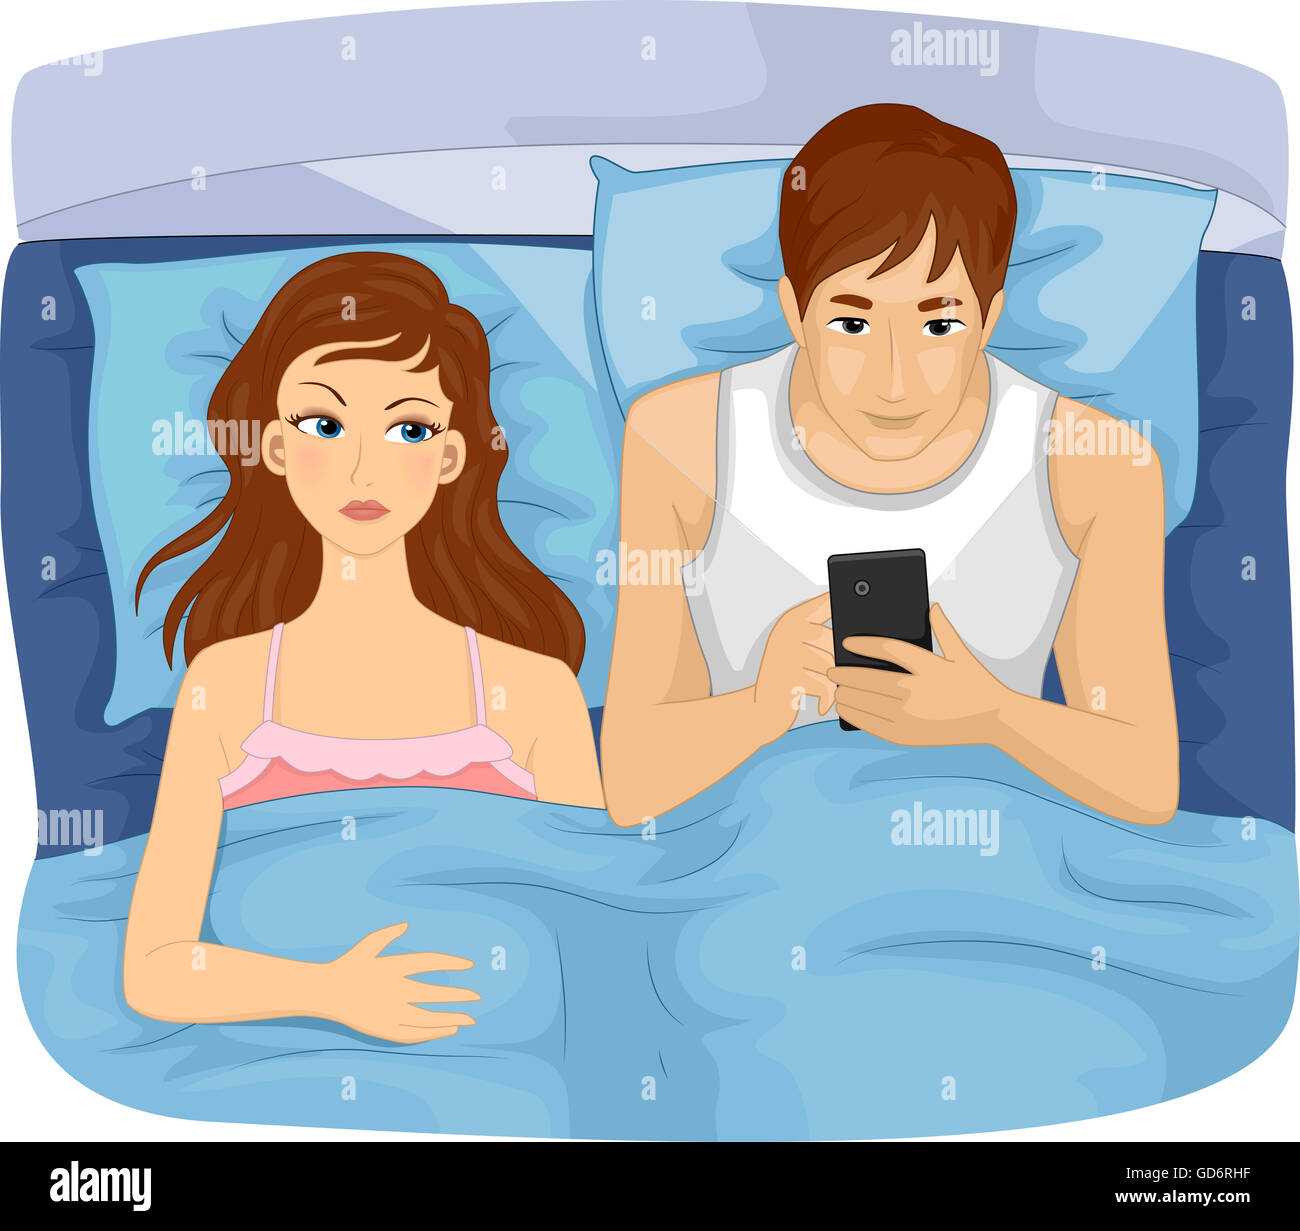 Illustration of an Irritated Wife Watching as Her Husband Fiddle with His Phone Stock Photo